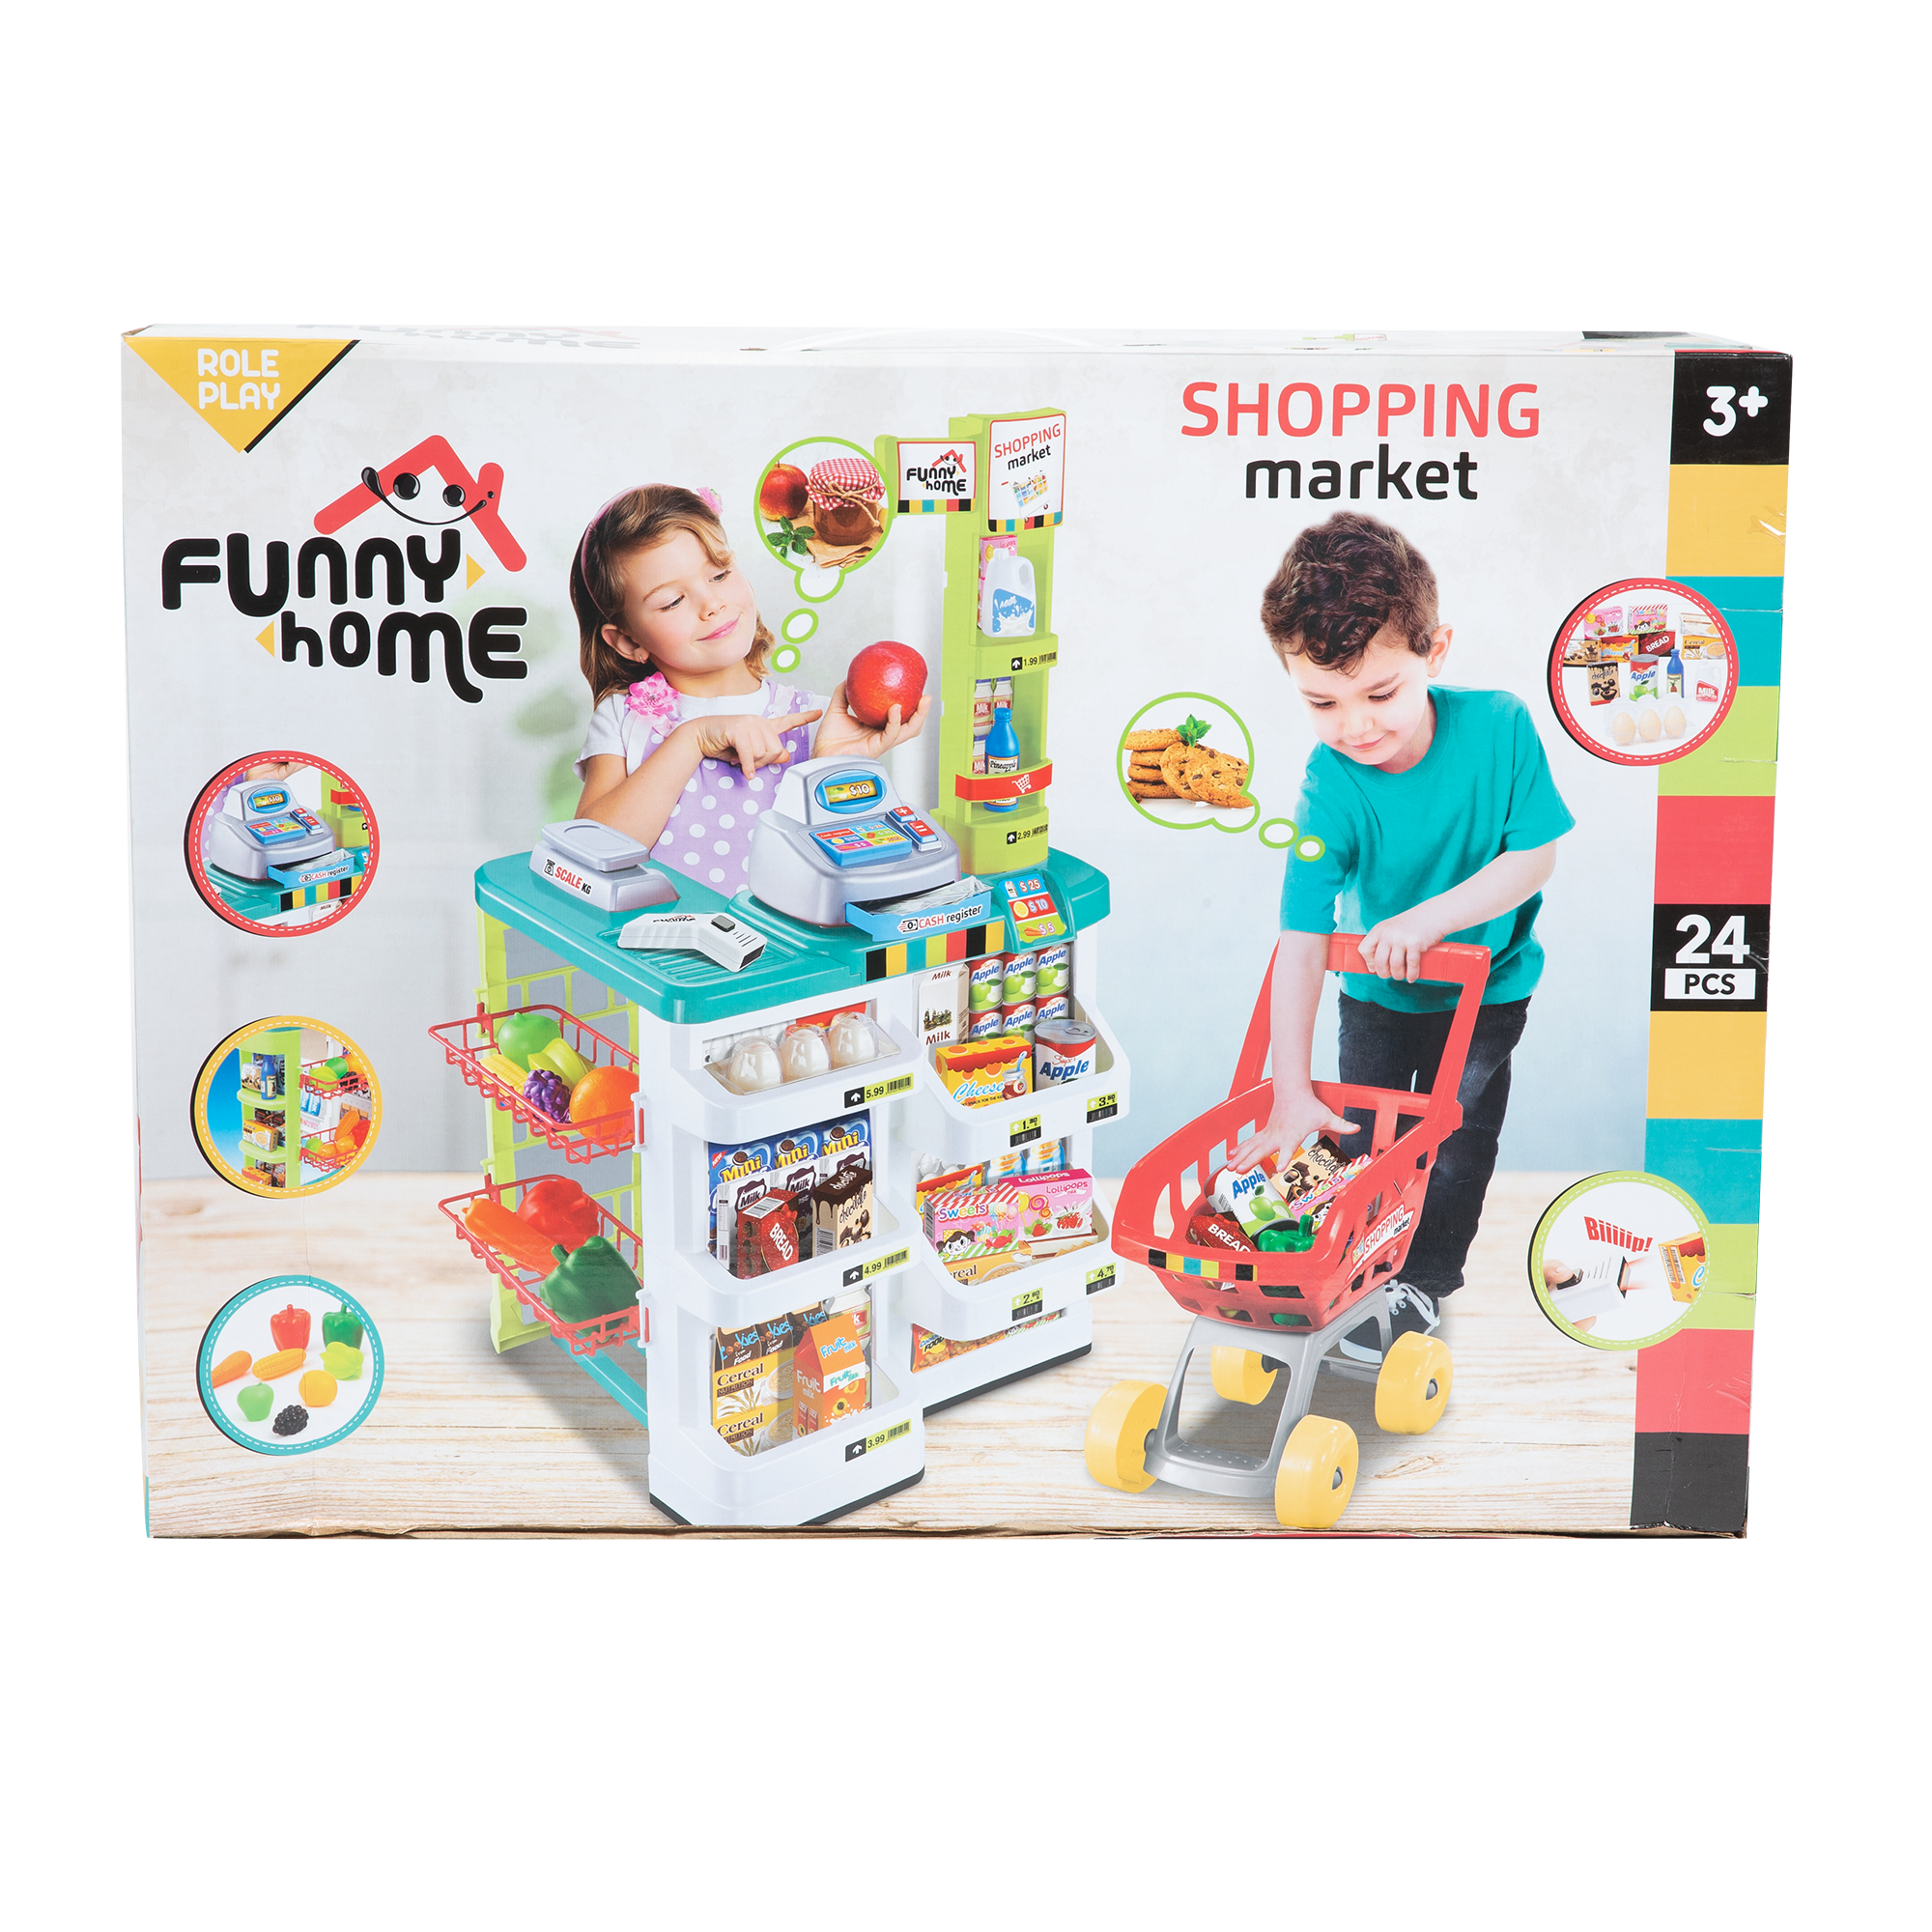 Shopping market - FUNNY HOME